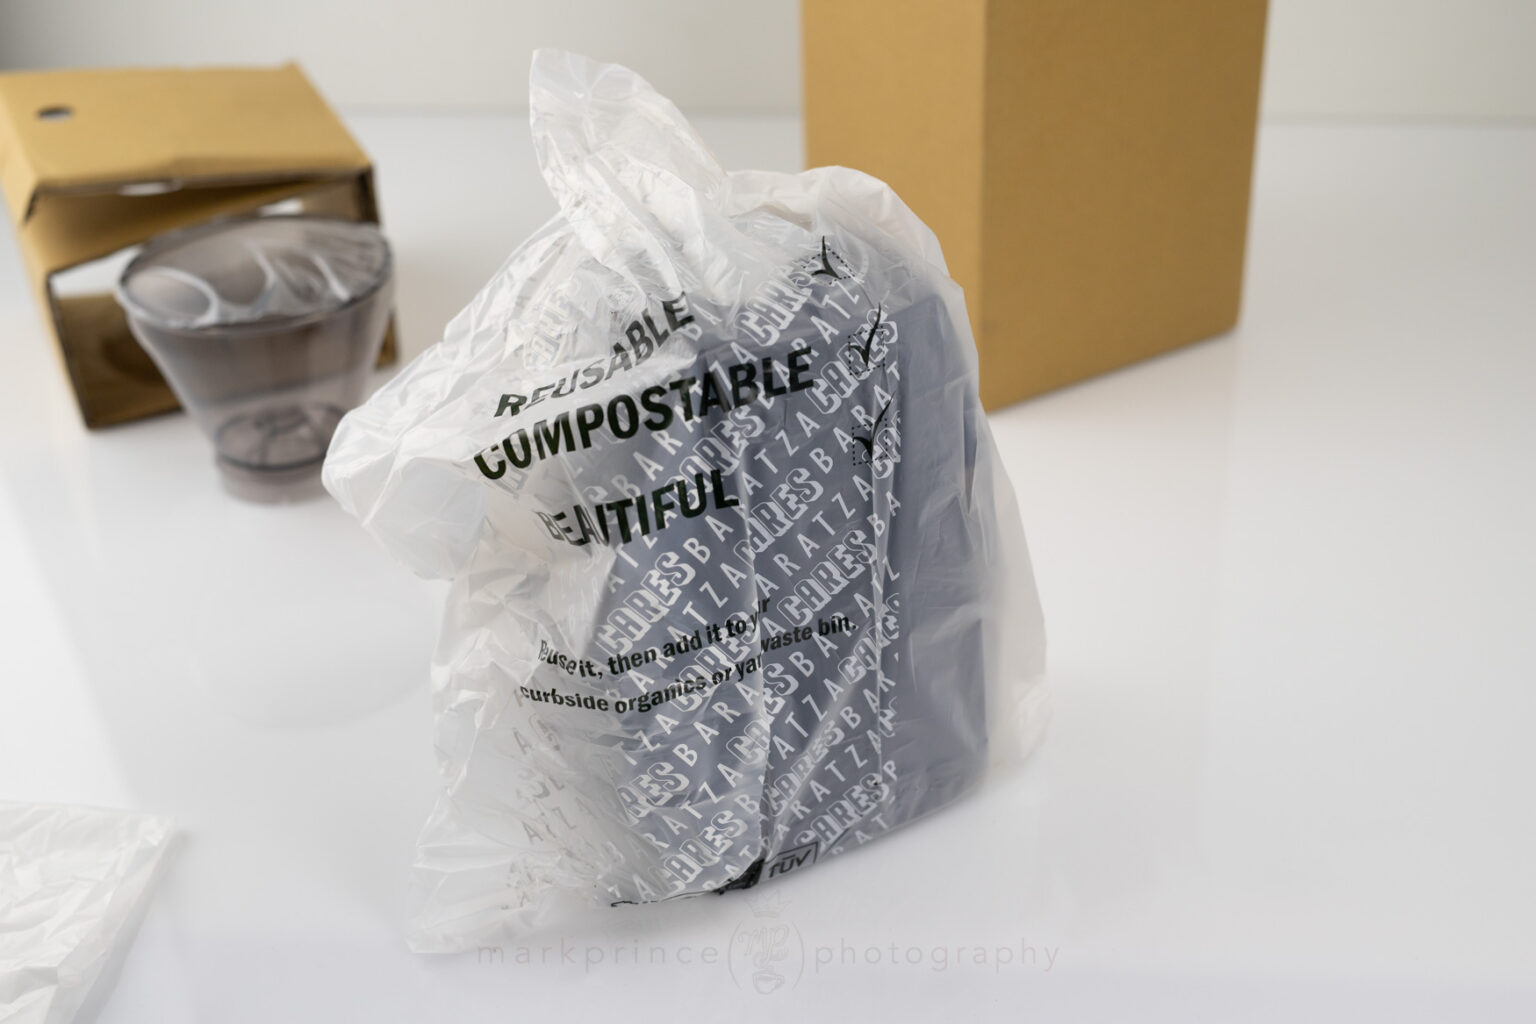 The main body removed from the box, wrapped in a compostable bag.